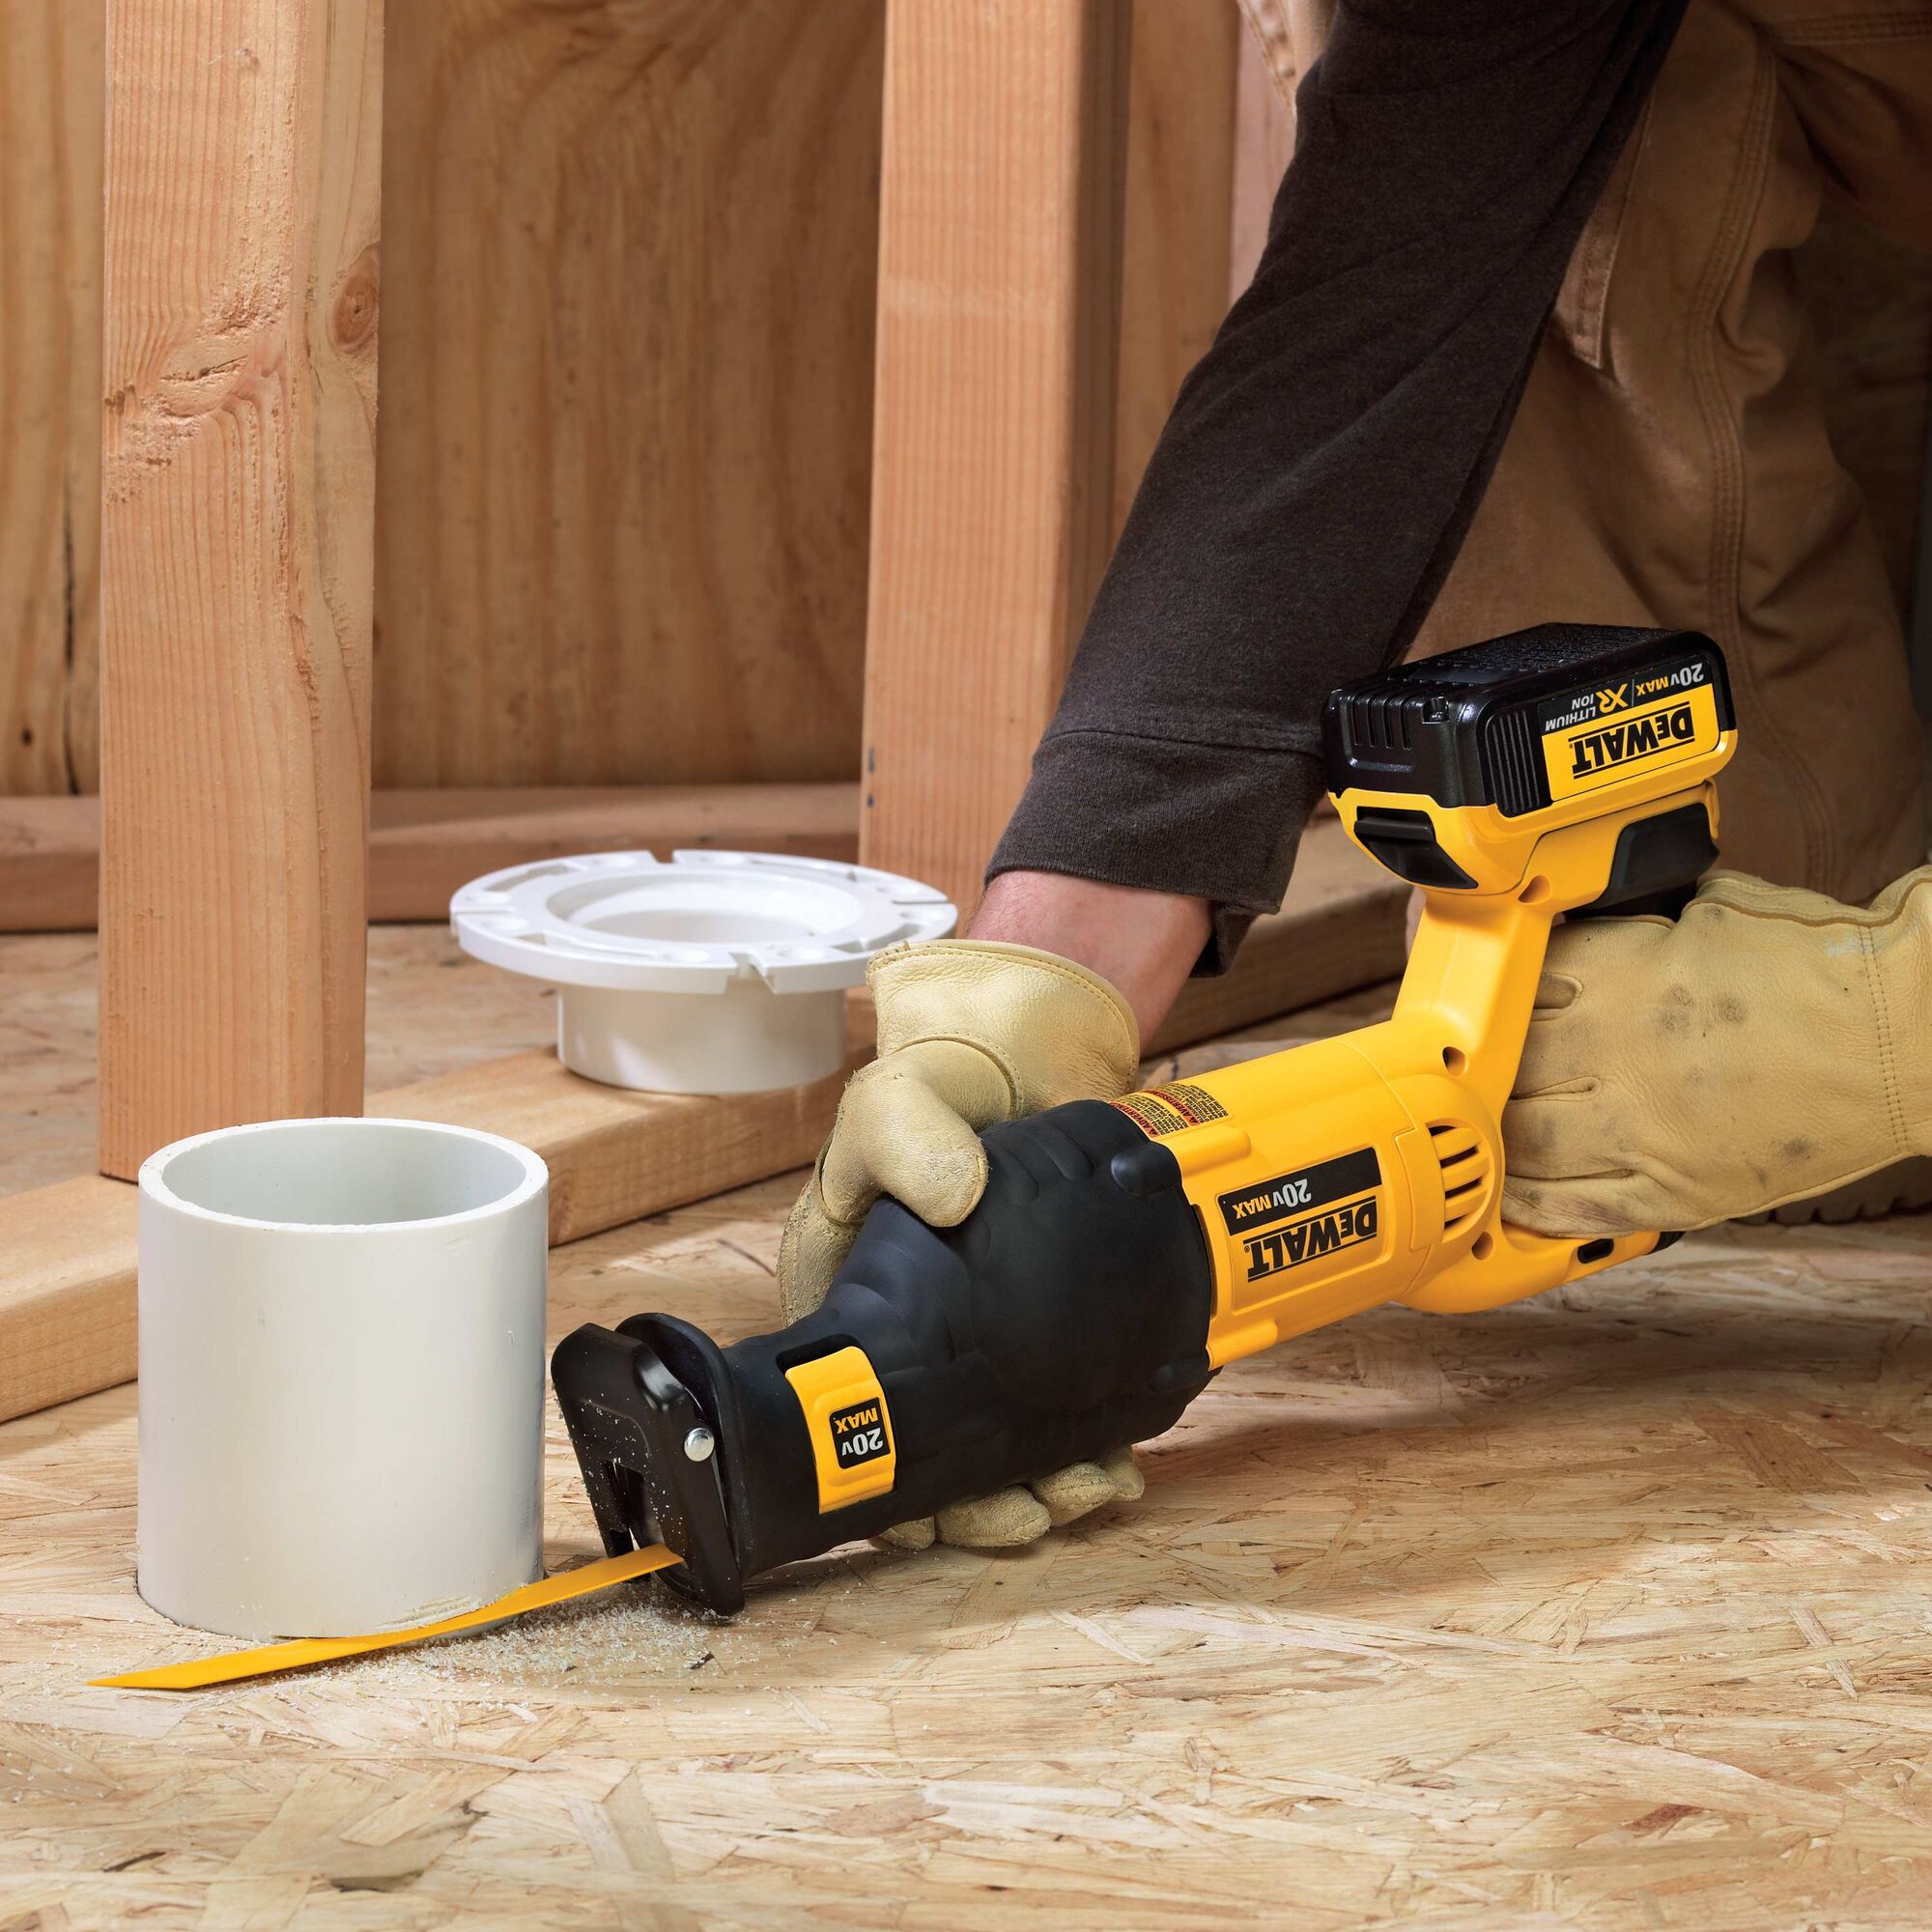 DEWALT 20V MAX Cordless Reciprocating Saw (Tool Only) - Town